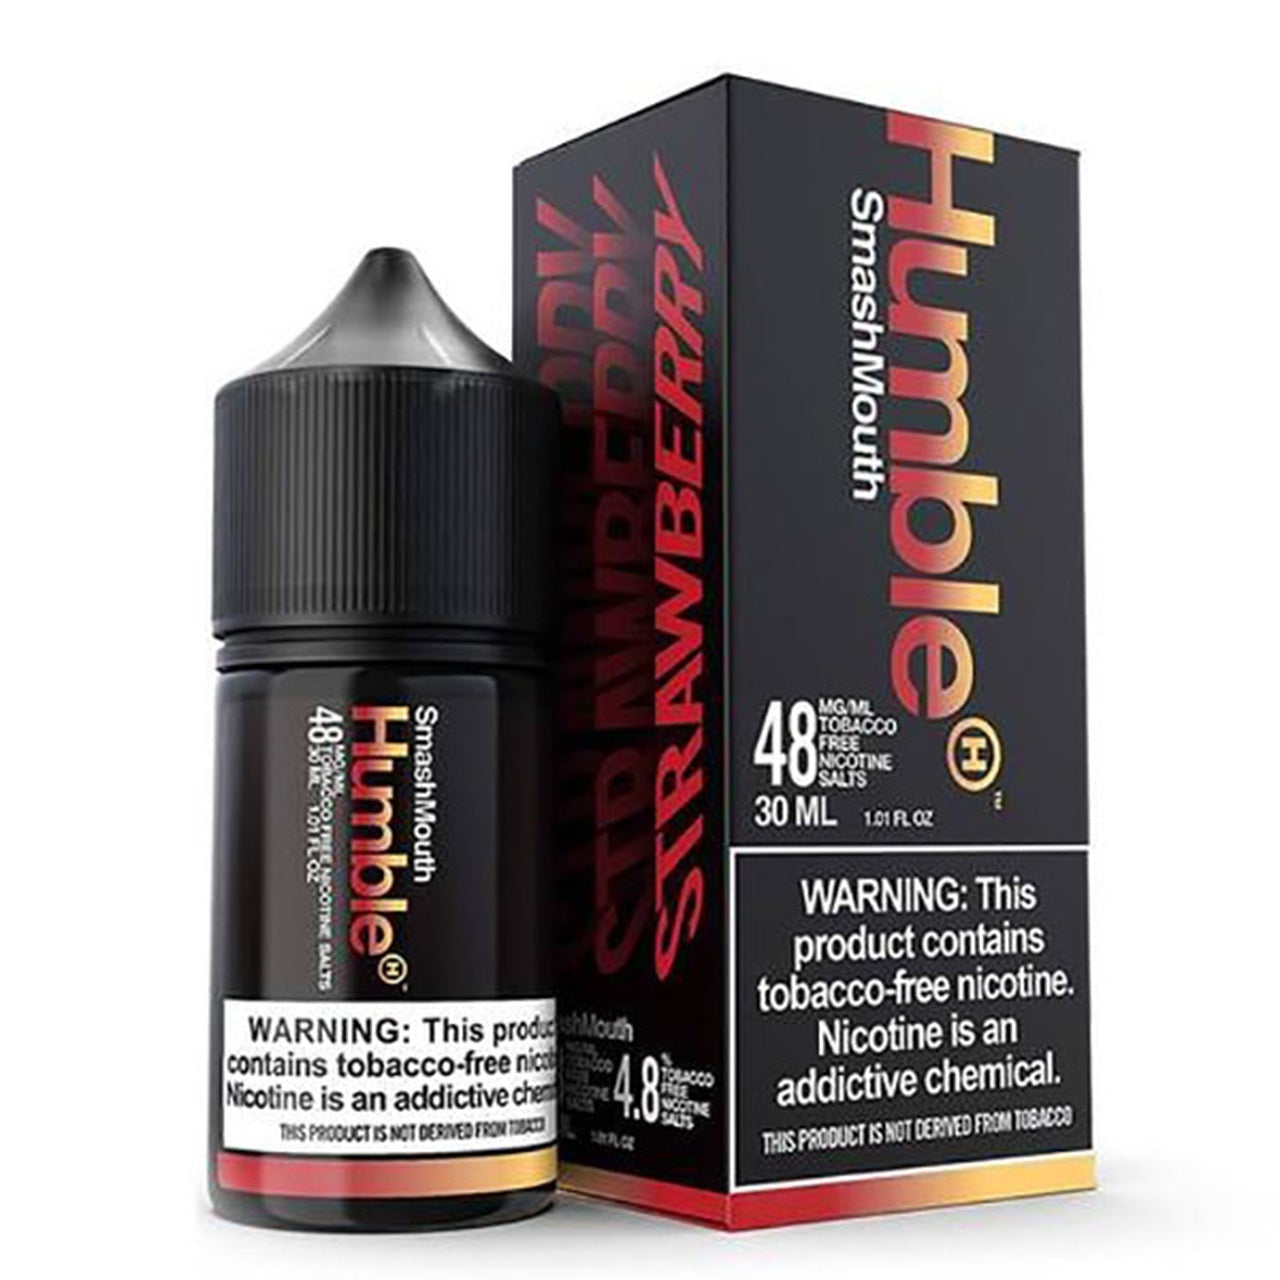 Smash Mouth Tobacco-Free Nicotine By Humble Salts 30mL with Packaging